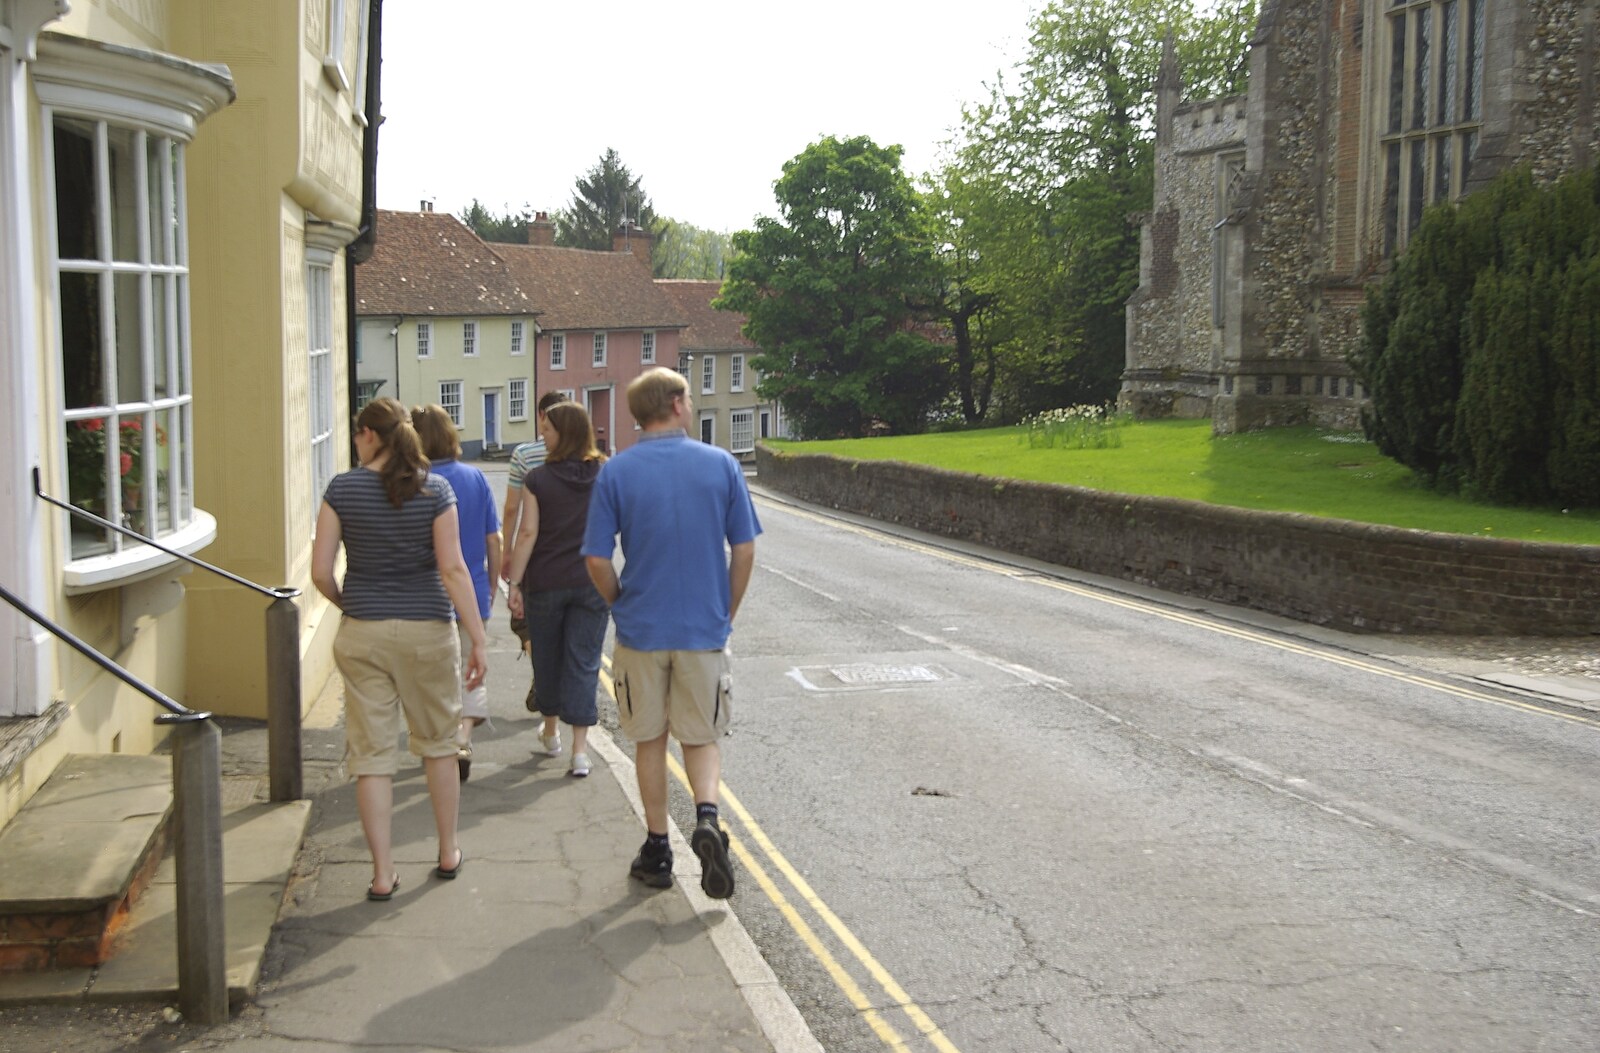 The BSCC Weekend Away, Thaxted, Essex - 10th May 2008: We wander down Watling Street into town